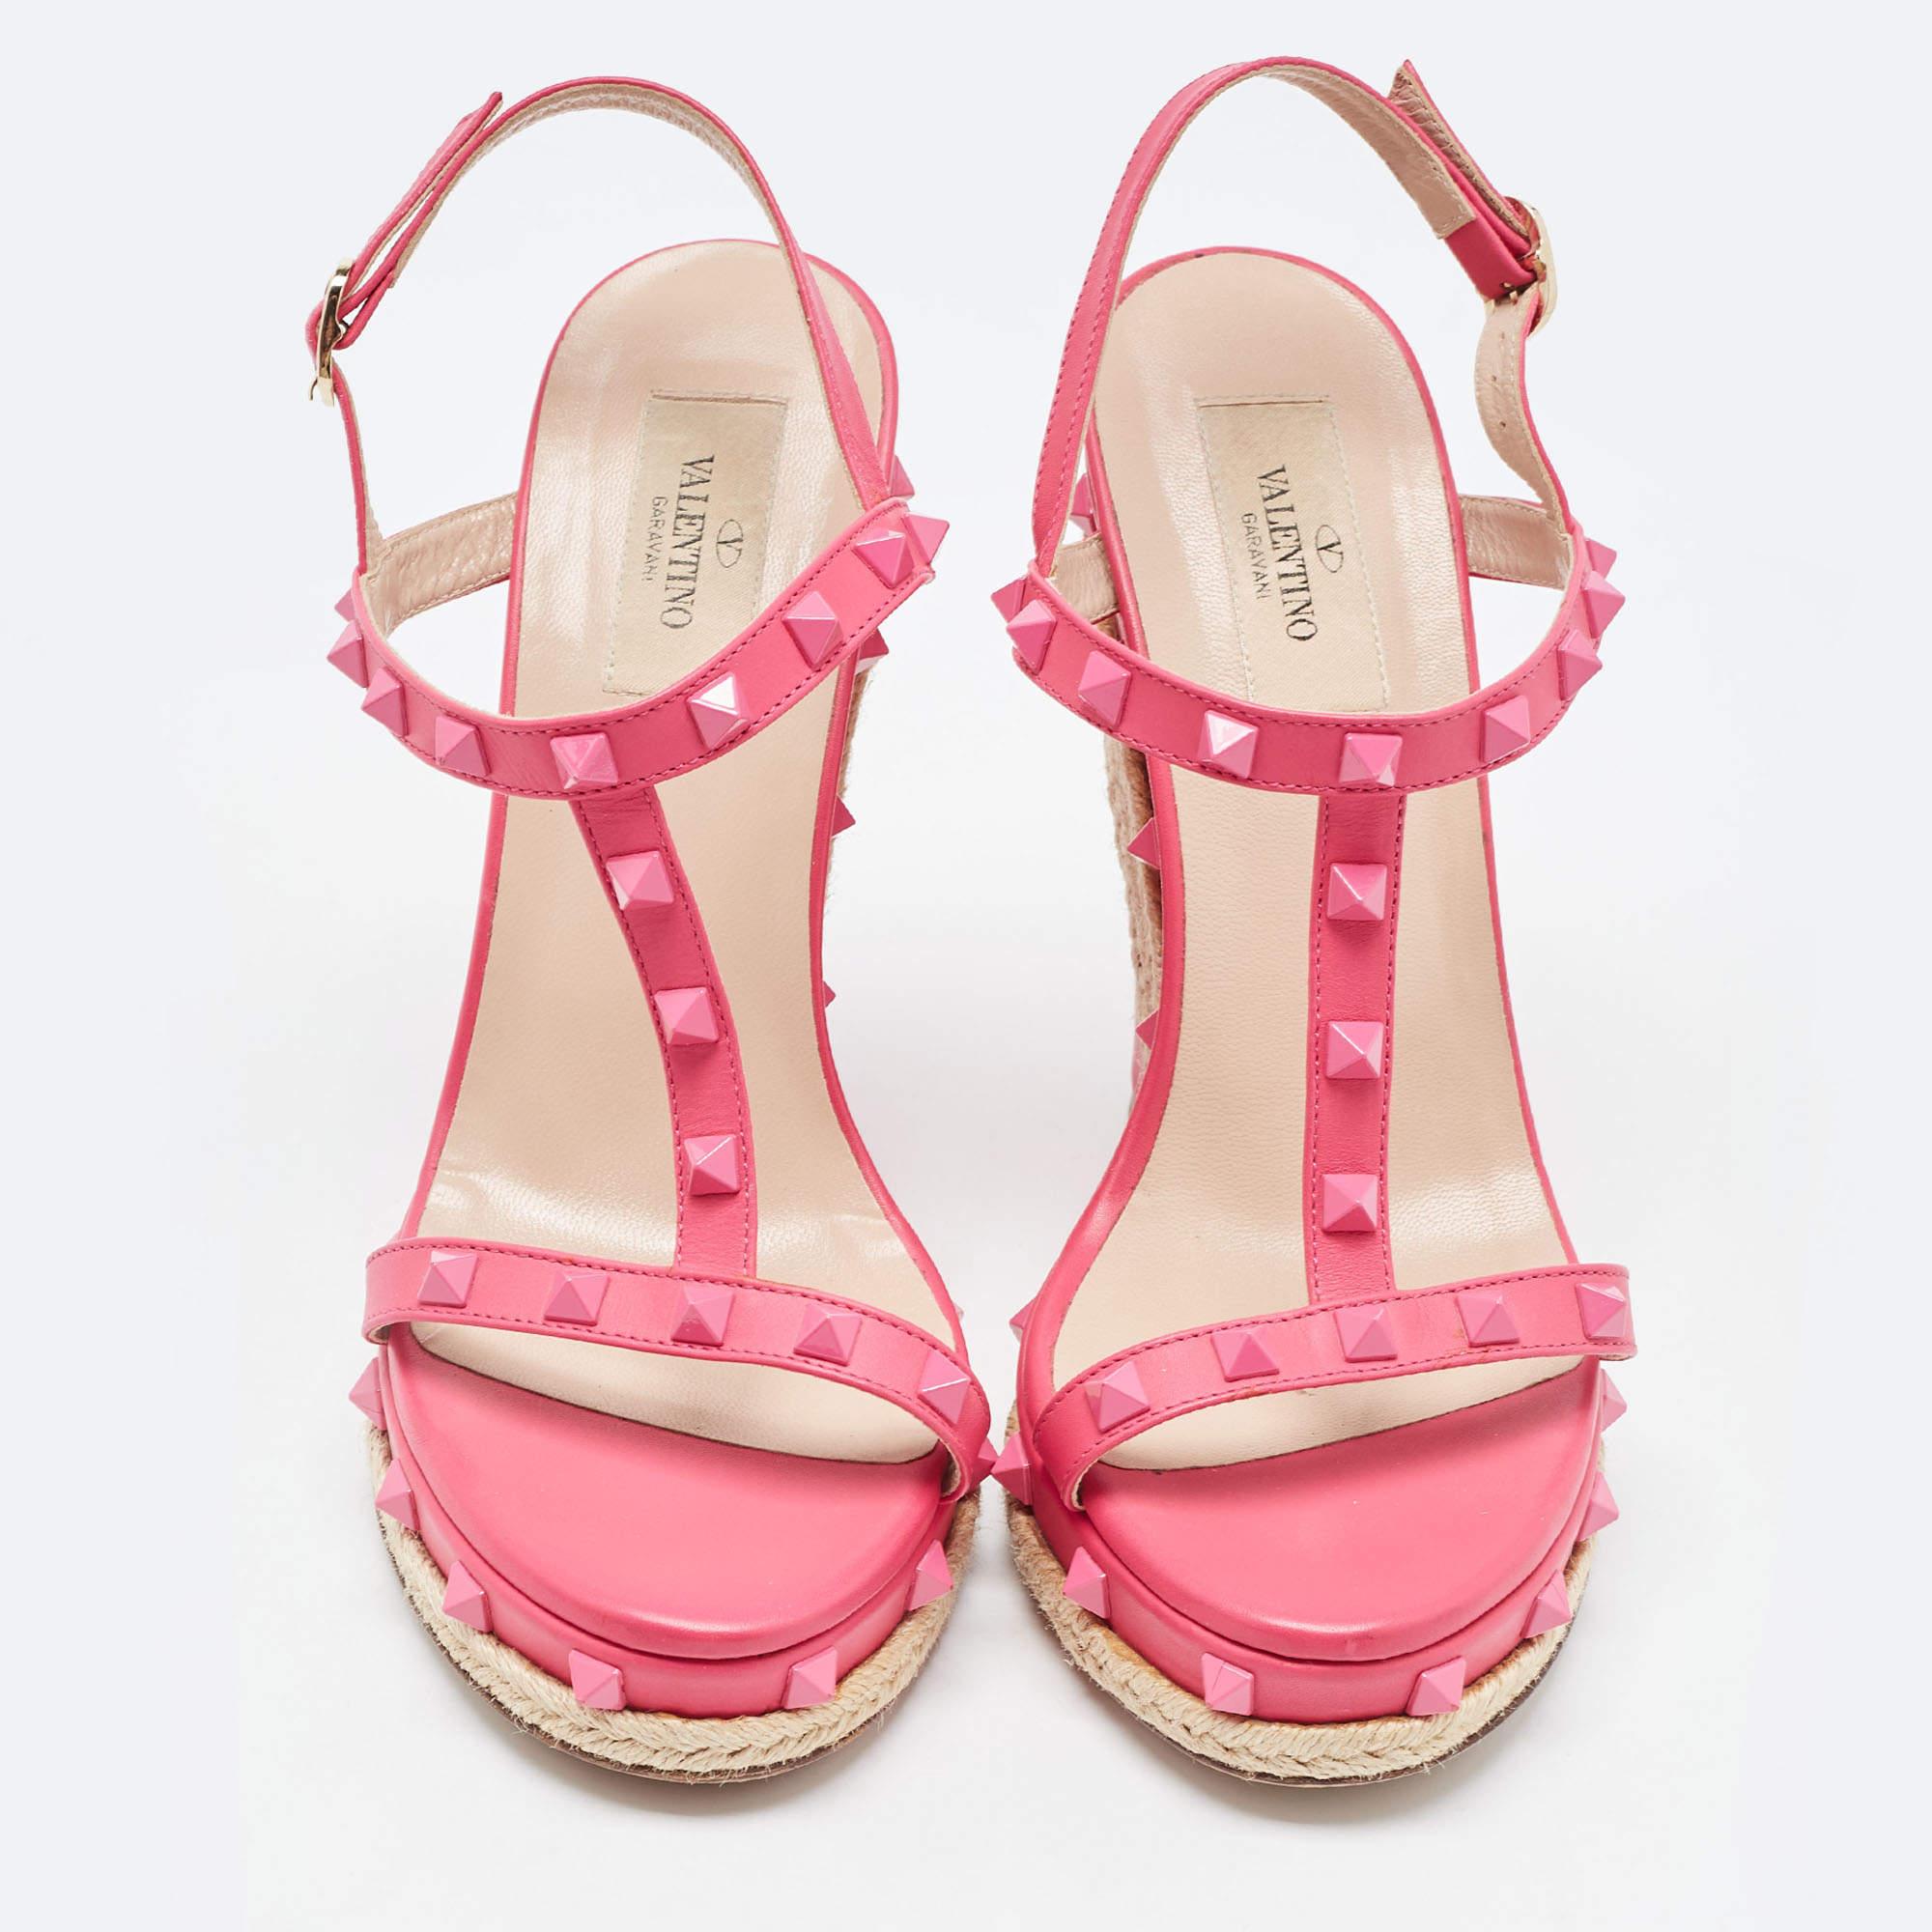 Women's Valentino Pink Leather Rockstud Wedge Ankle Sandals Size 38.5